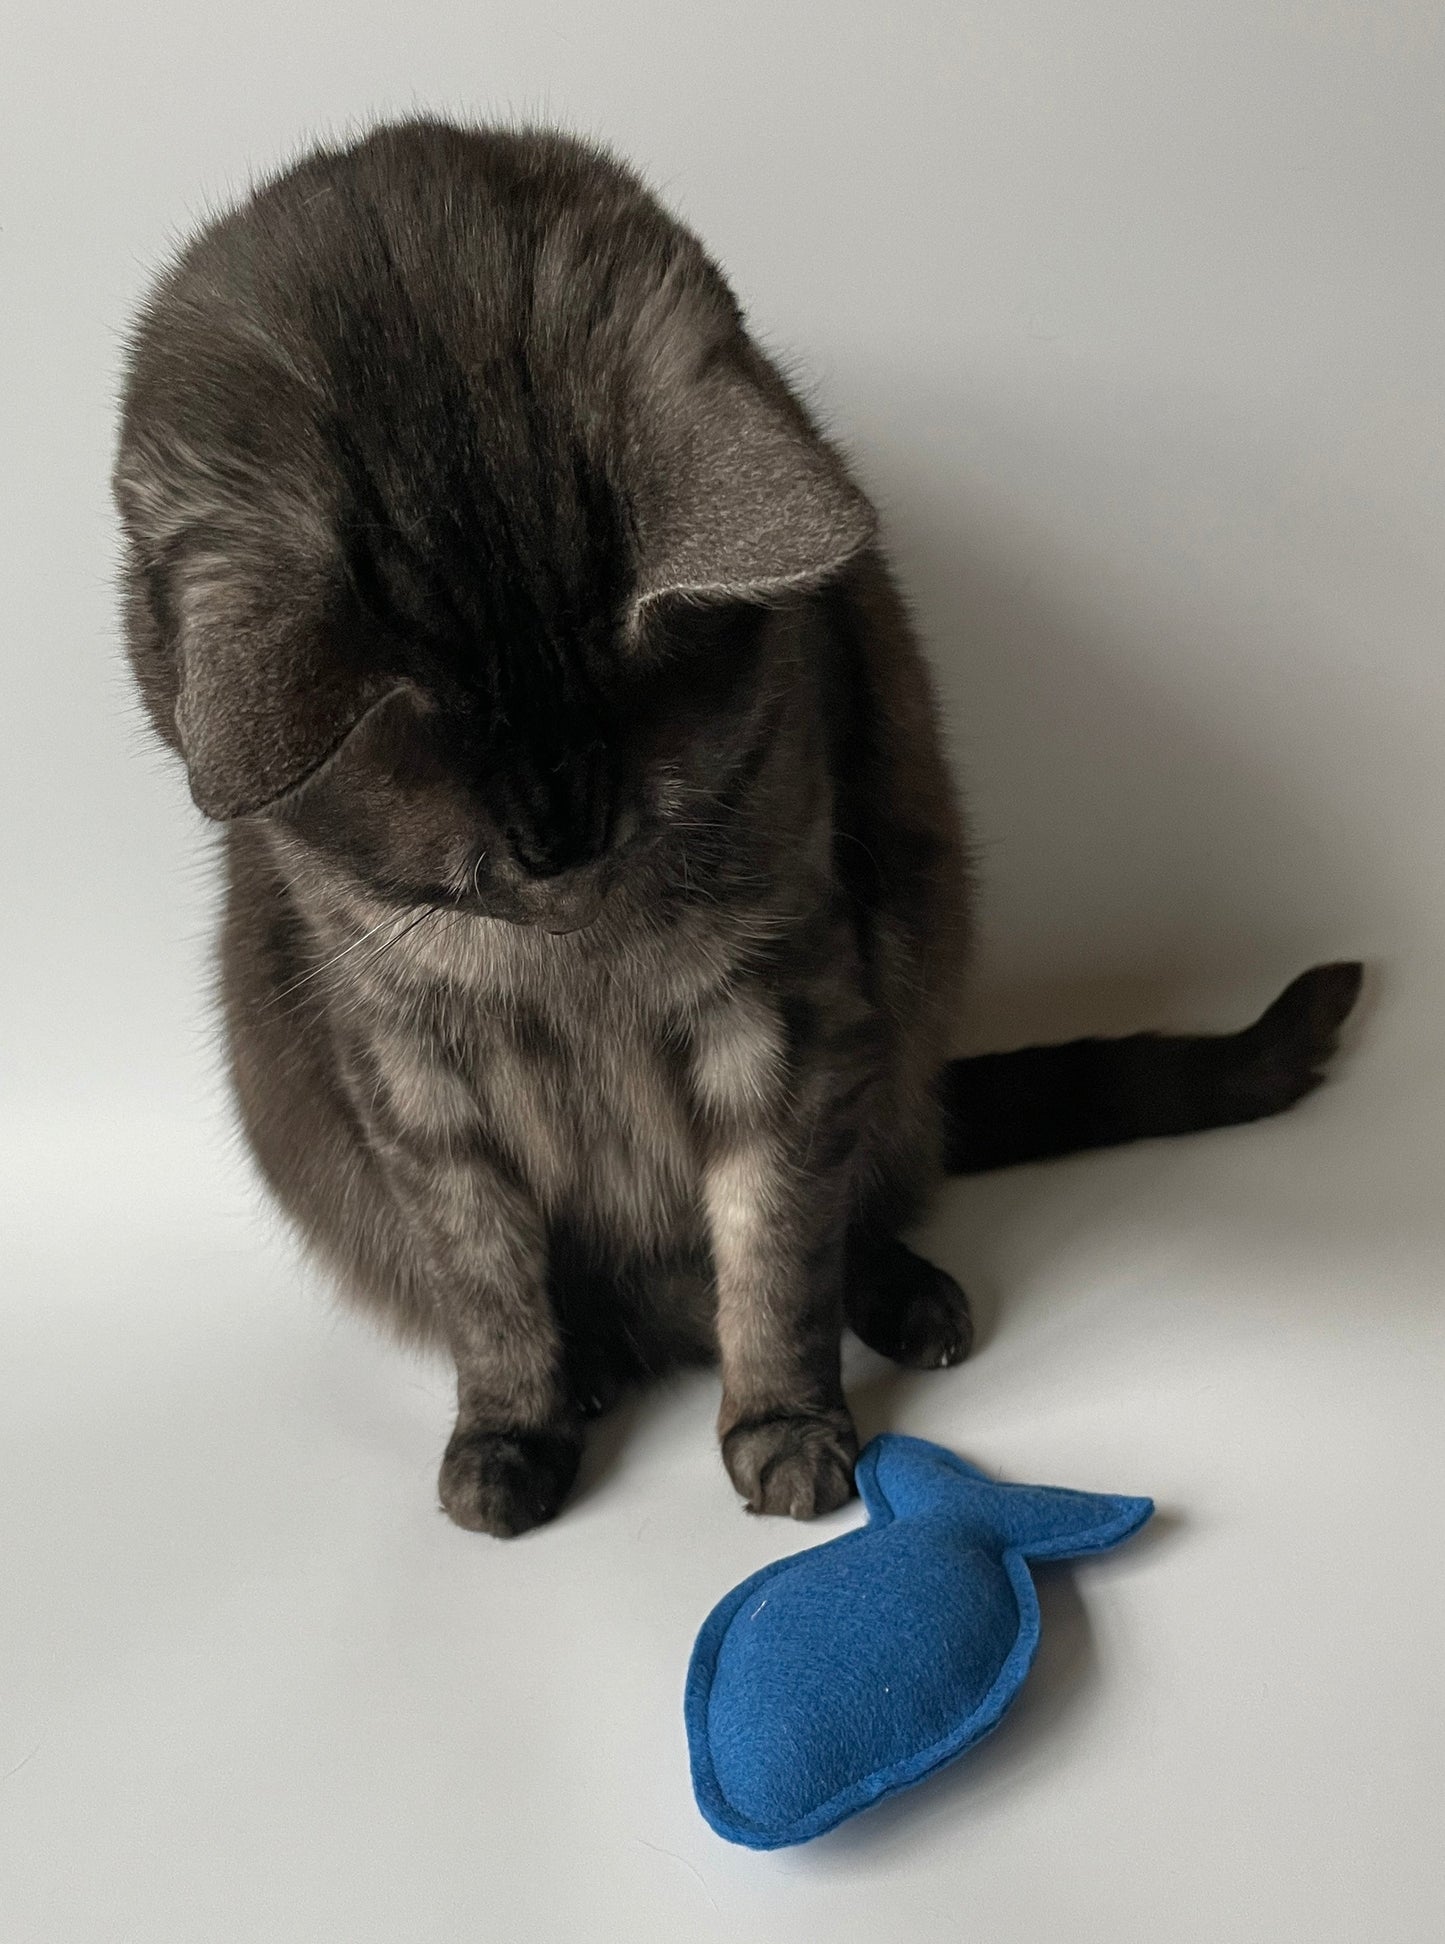 Cat Playing with fish toy